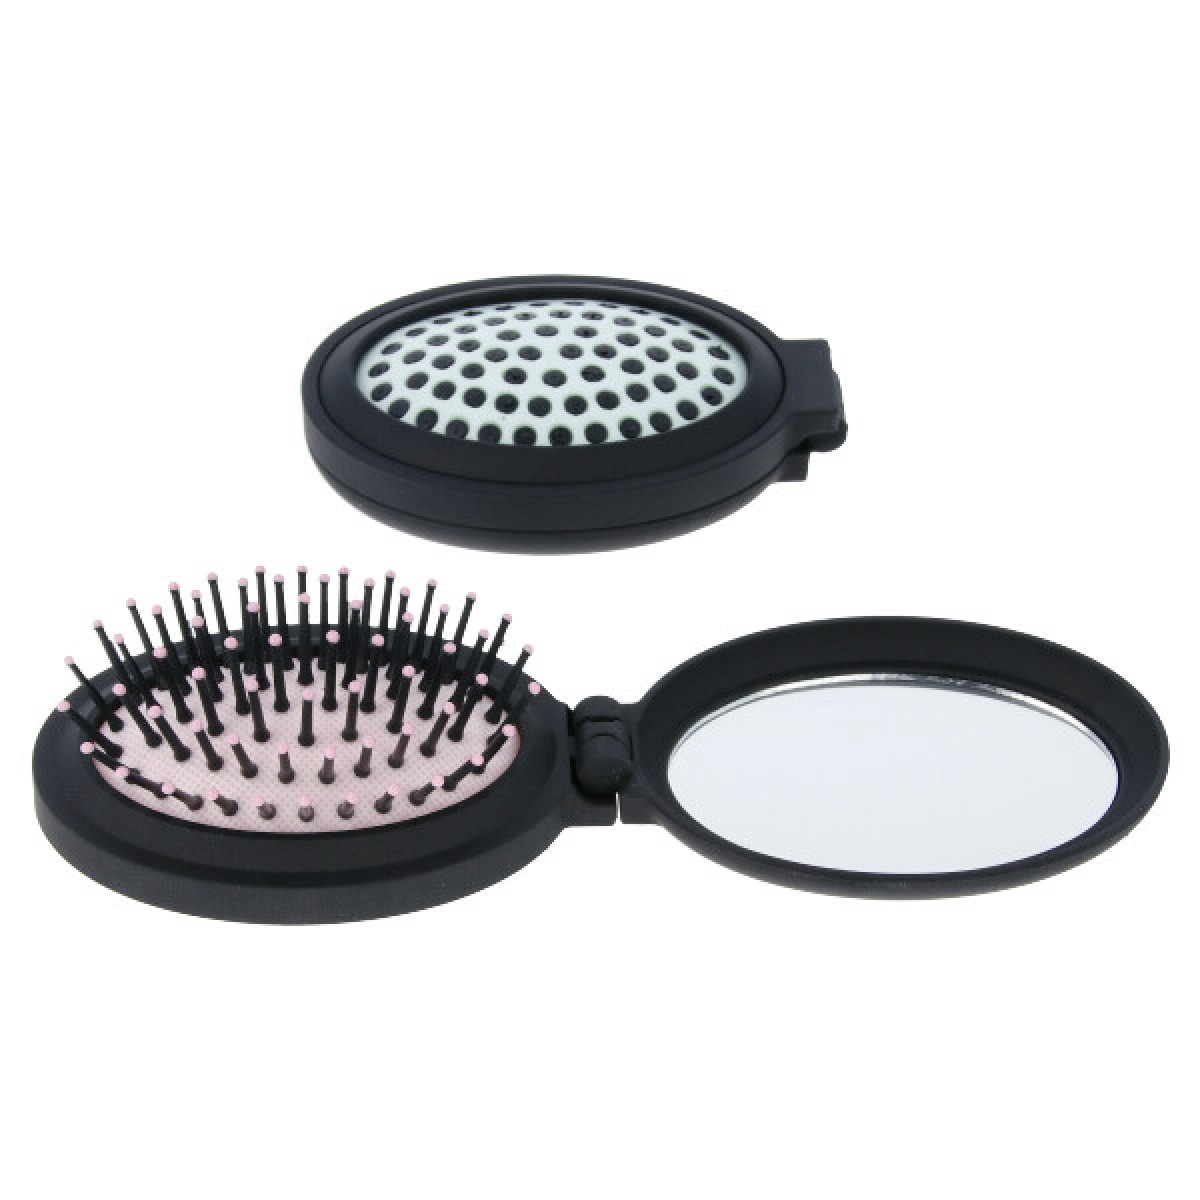 BAG BRUSH - TRAVEL OVAL SPLIT WITH MIRROR PINK / GREEN